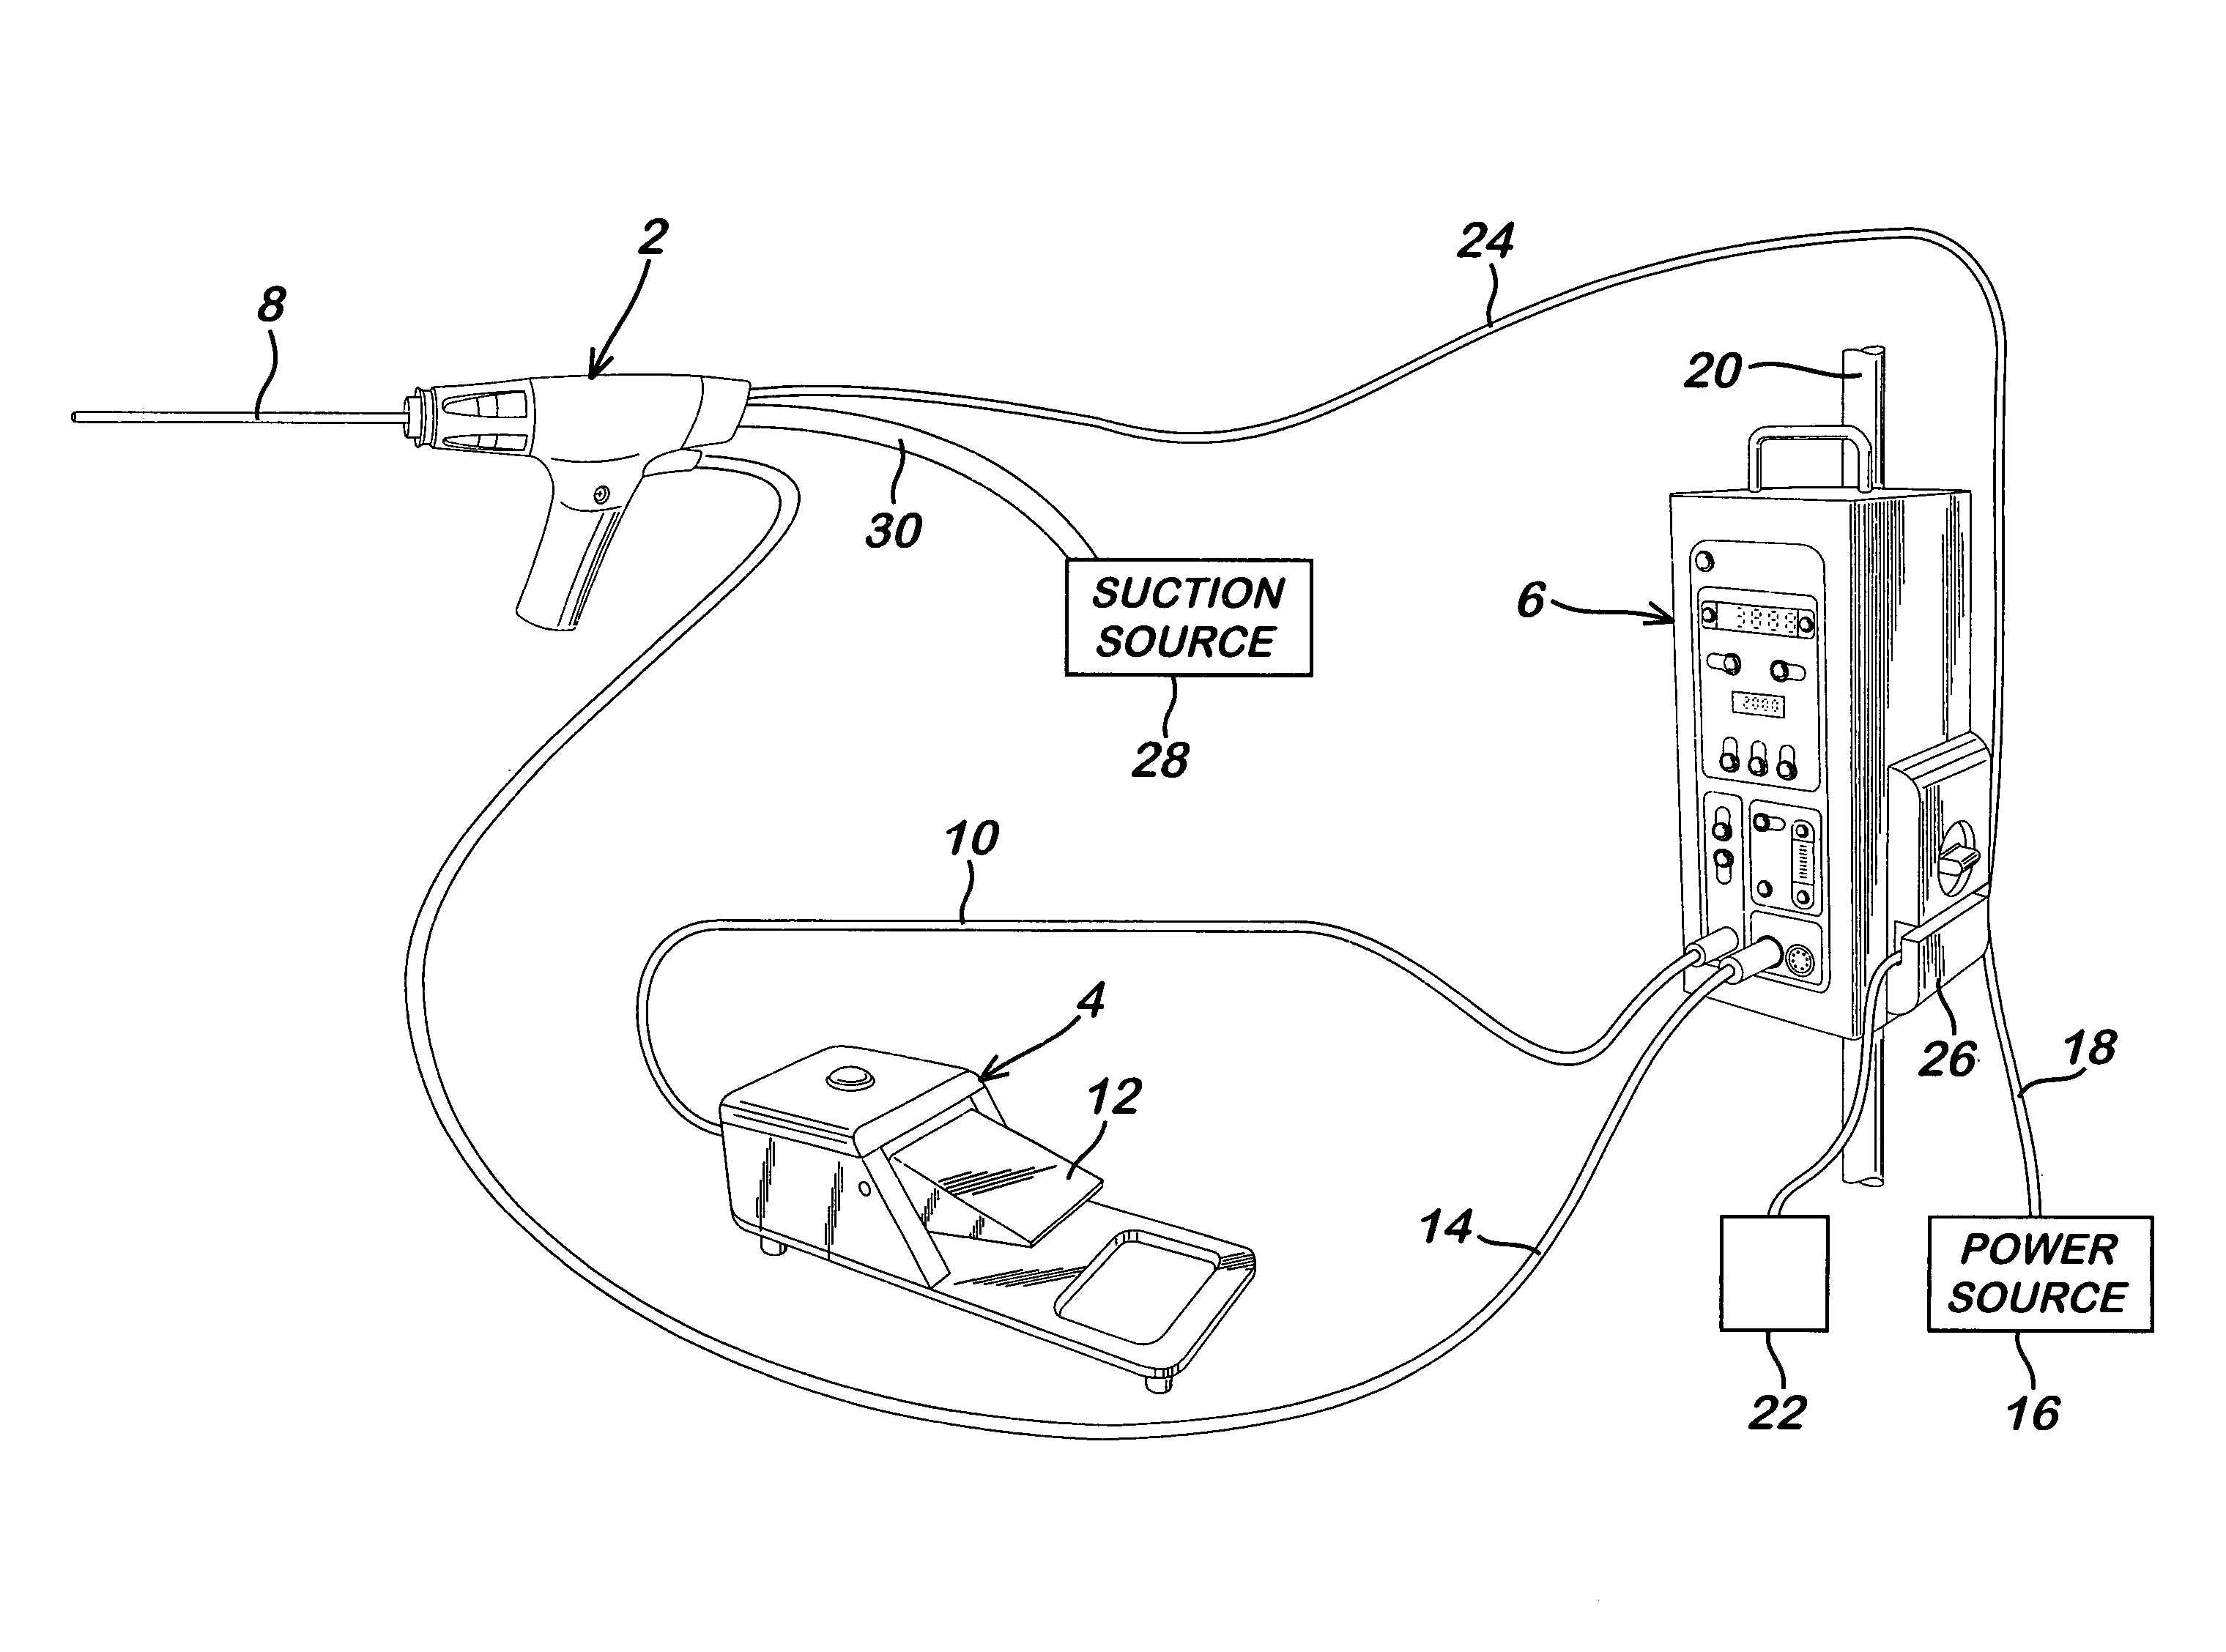 Powered surgical apparatus, method of manufacturing powered surgical apparatus, and method of using powered surgical apparatus